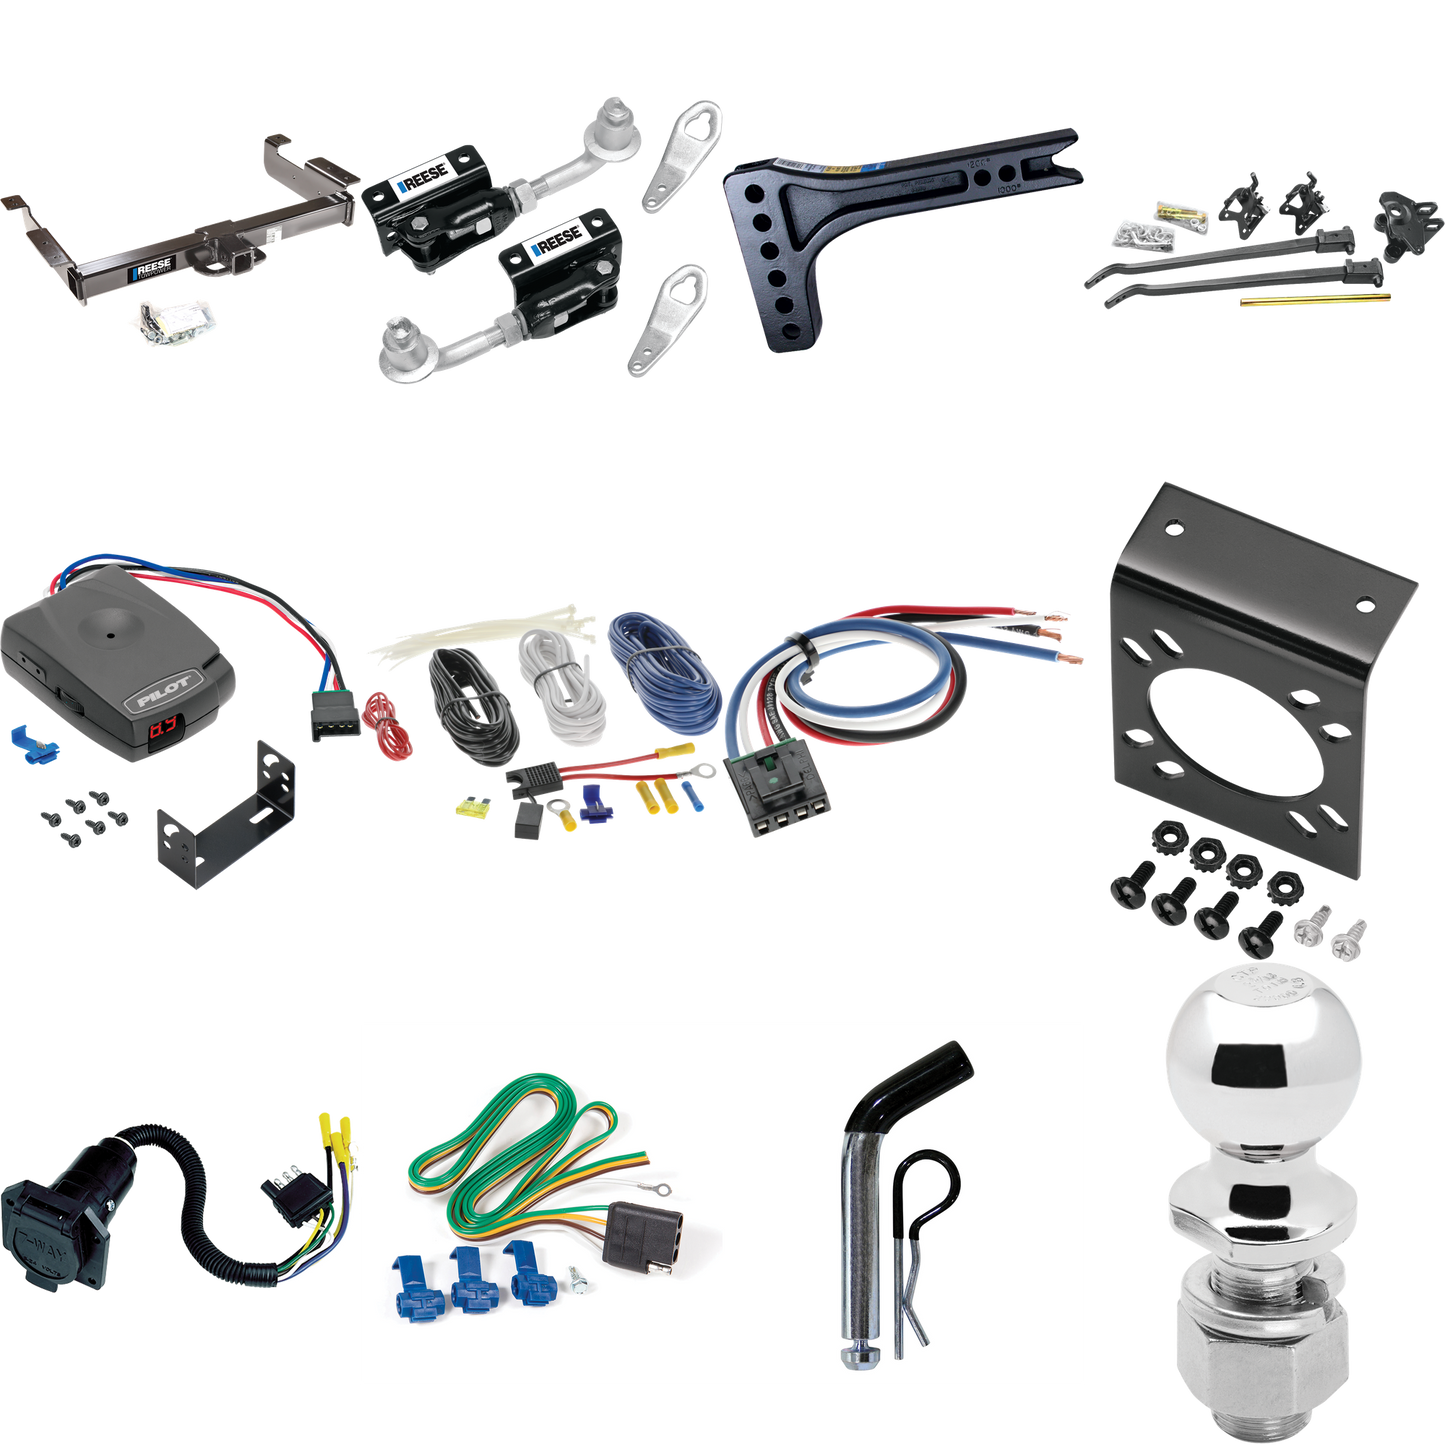 Fits 1996-1999 Chevrolet Express 1500 Trailer Hitch Tow PKG w/ 15K Trunnion Bar Weight Distribution Hitch + Pin/Clip + Dual Cam Sway Control + 2-5/16" Ball + Pro Series Pilot Brake Control + Generic BC Wiring Adapter + 7-Way RV Wiring By Reese Towpow